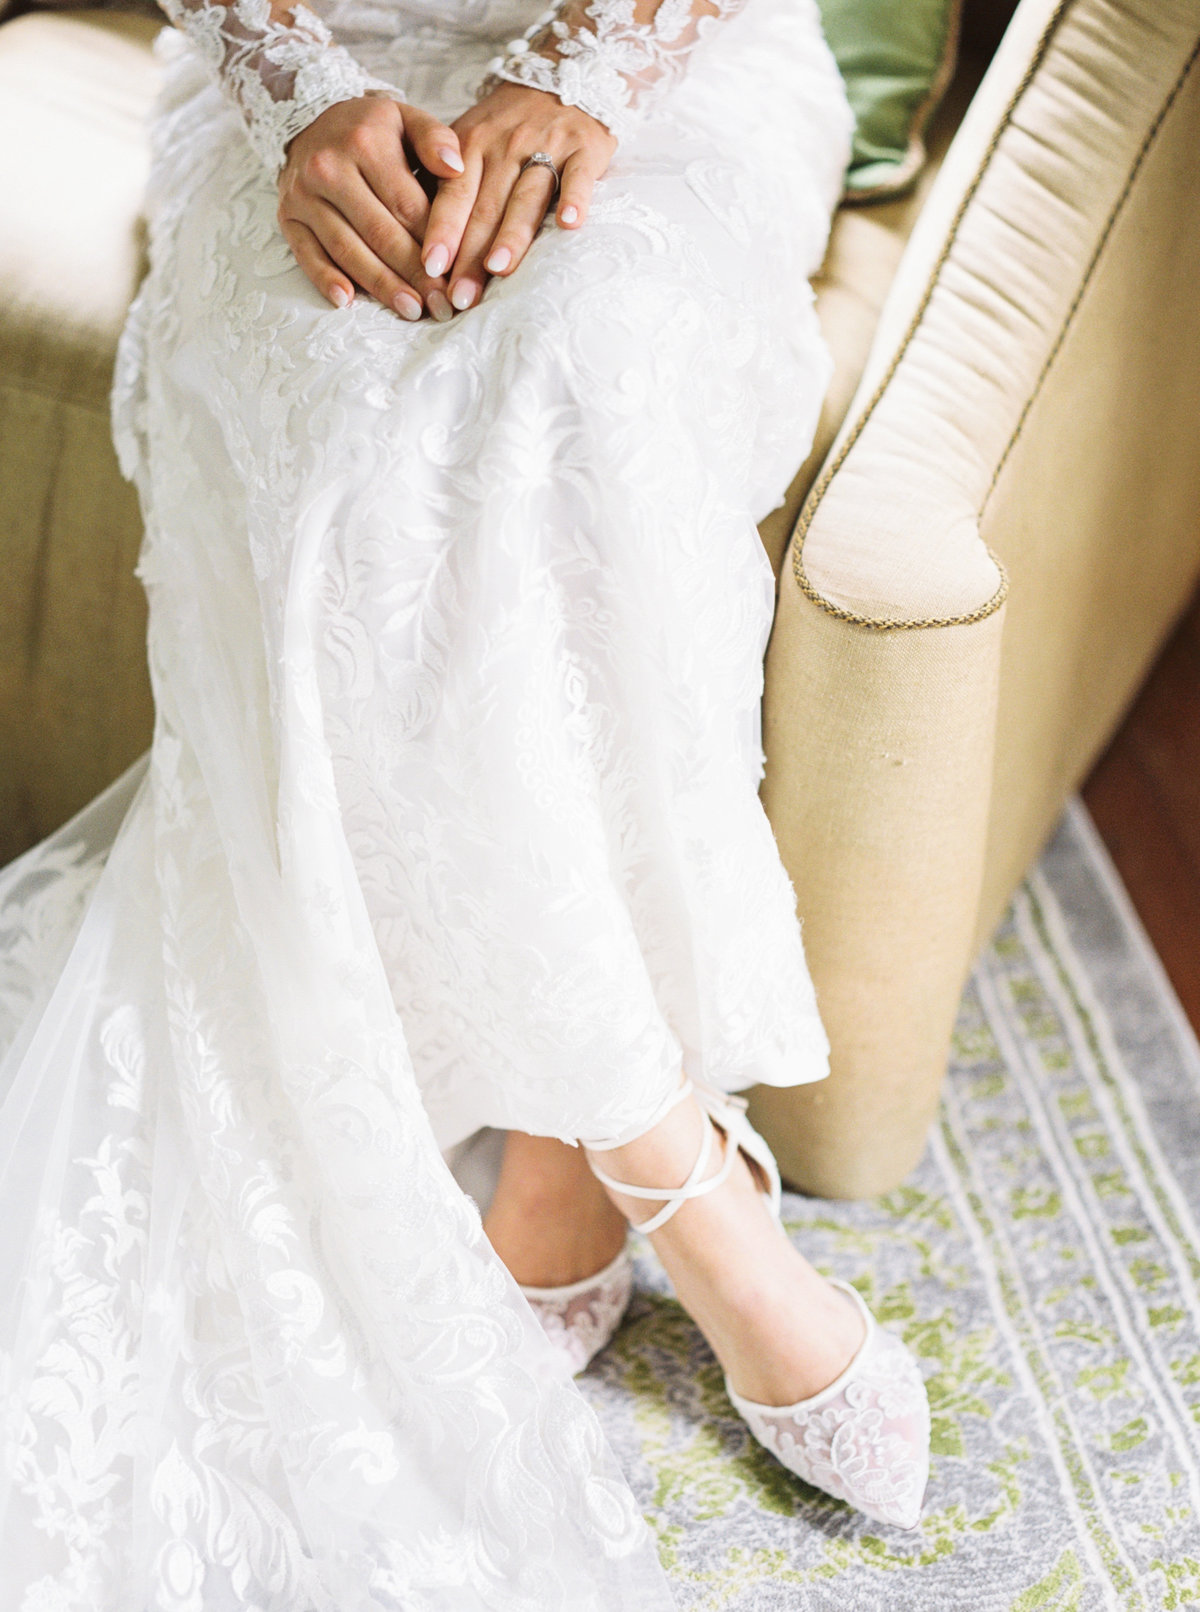 Bride with lace gown and shoes